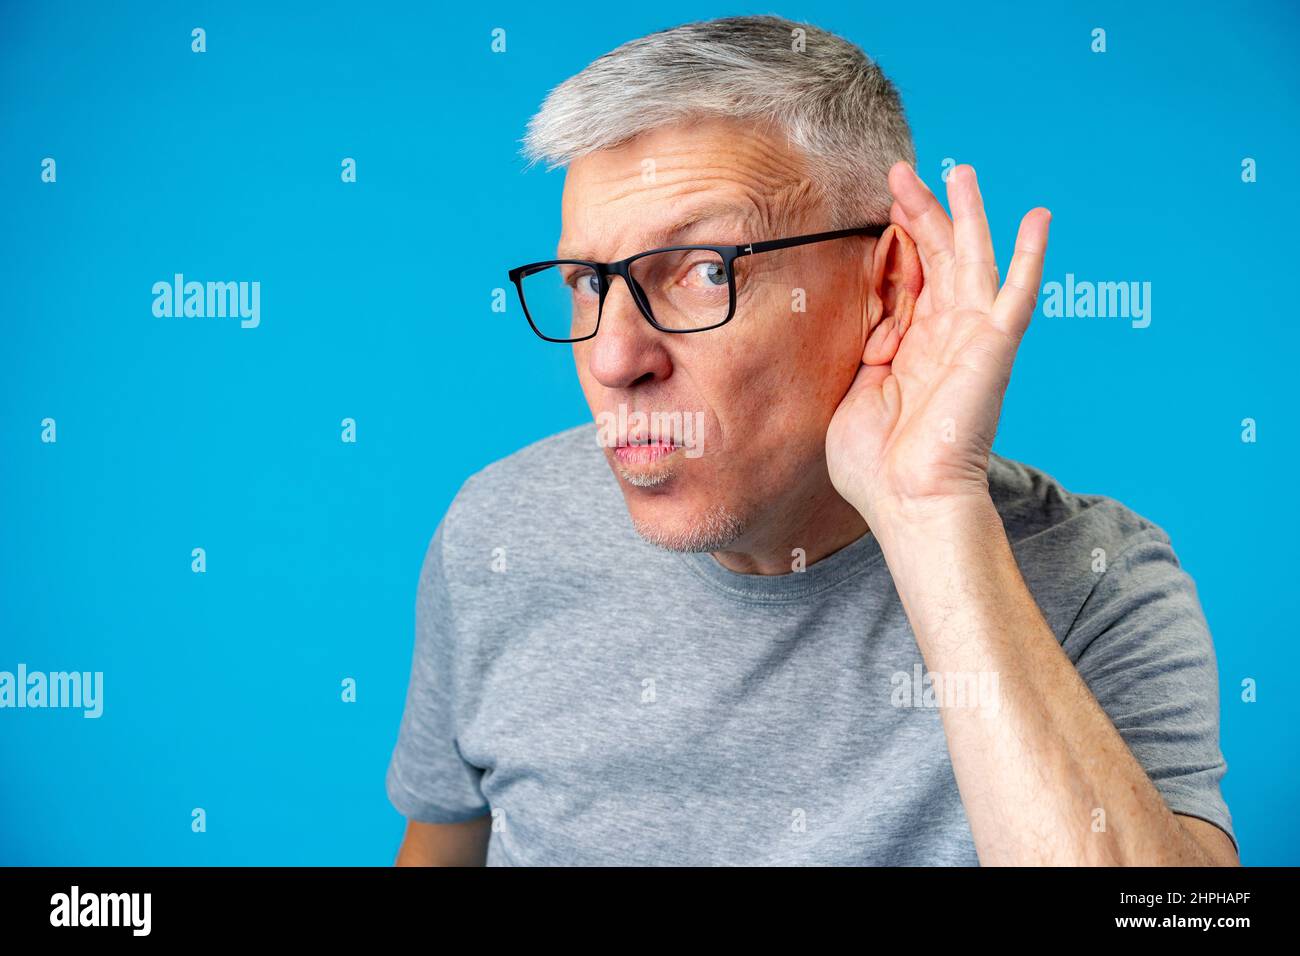 Middle age man over iblue background with hand over ear listening Stock Photo